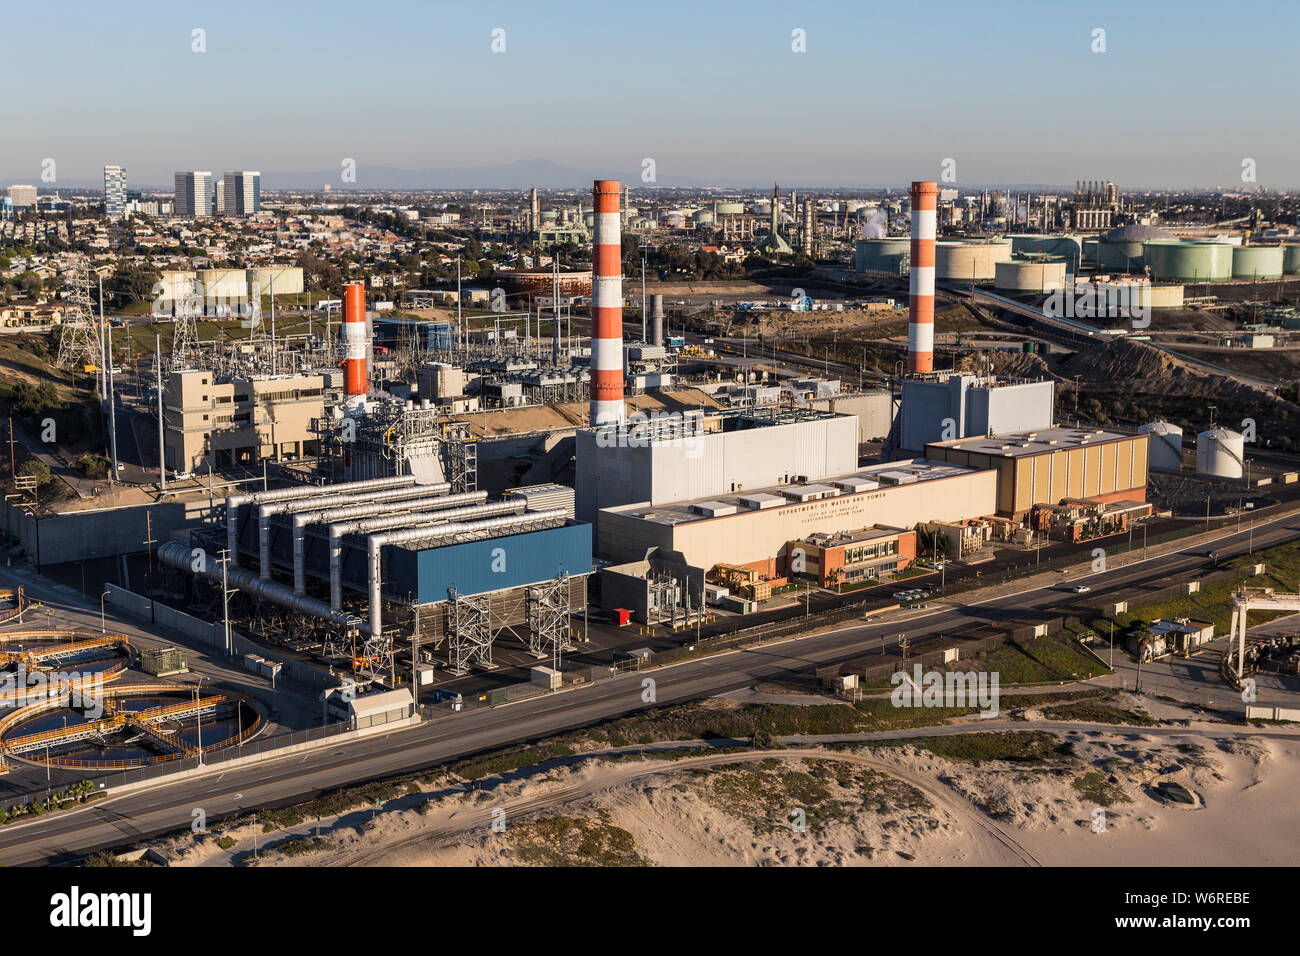 Los Angeles, California, USA - December 17, 2016:  Aerial view of Scattergood Steam Plant electric power generating facility near Dockweiler state bea Stock Photo